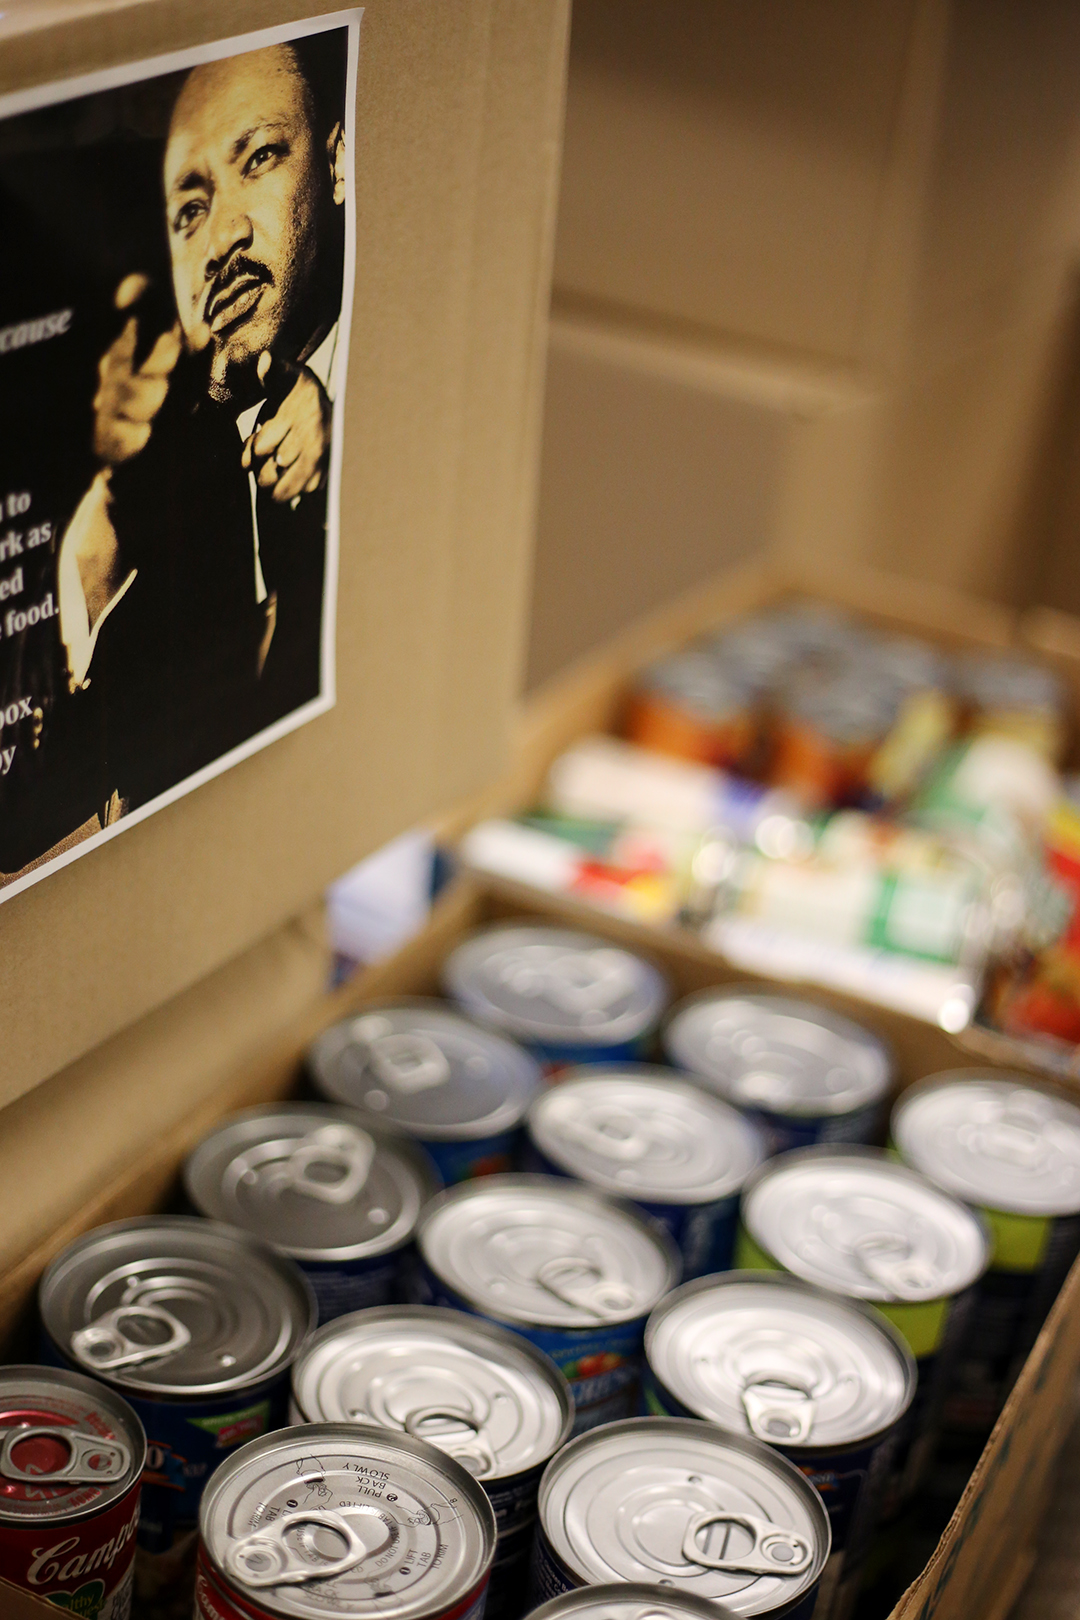 Canned food in a box. MLK on a poster.